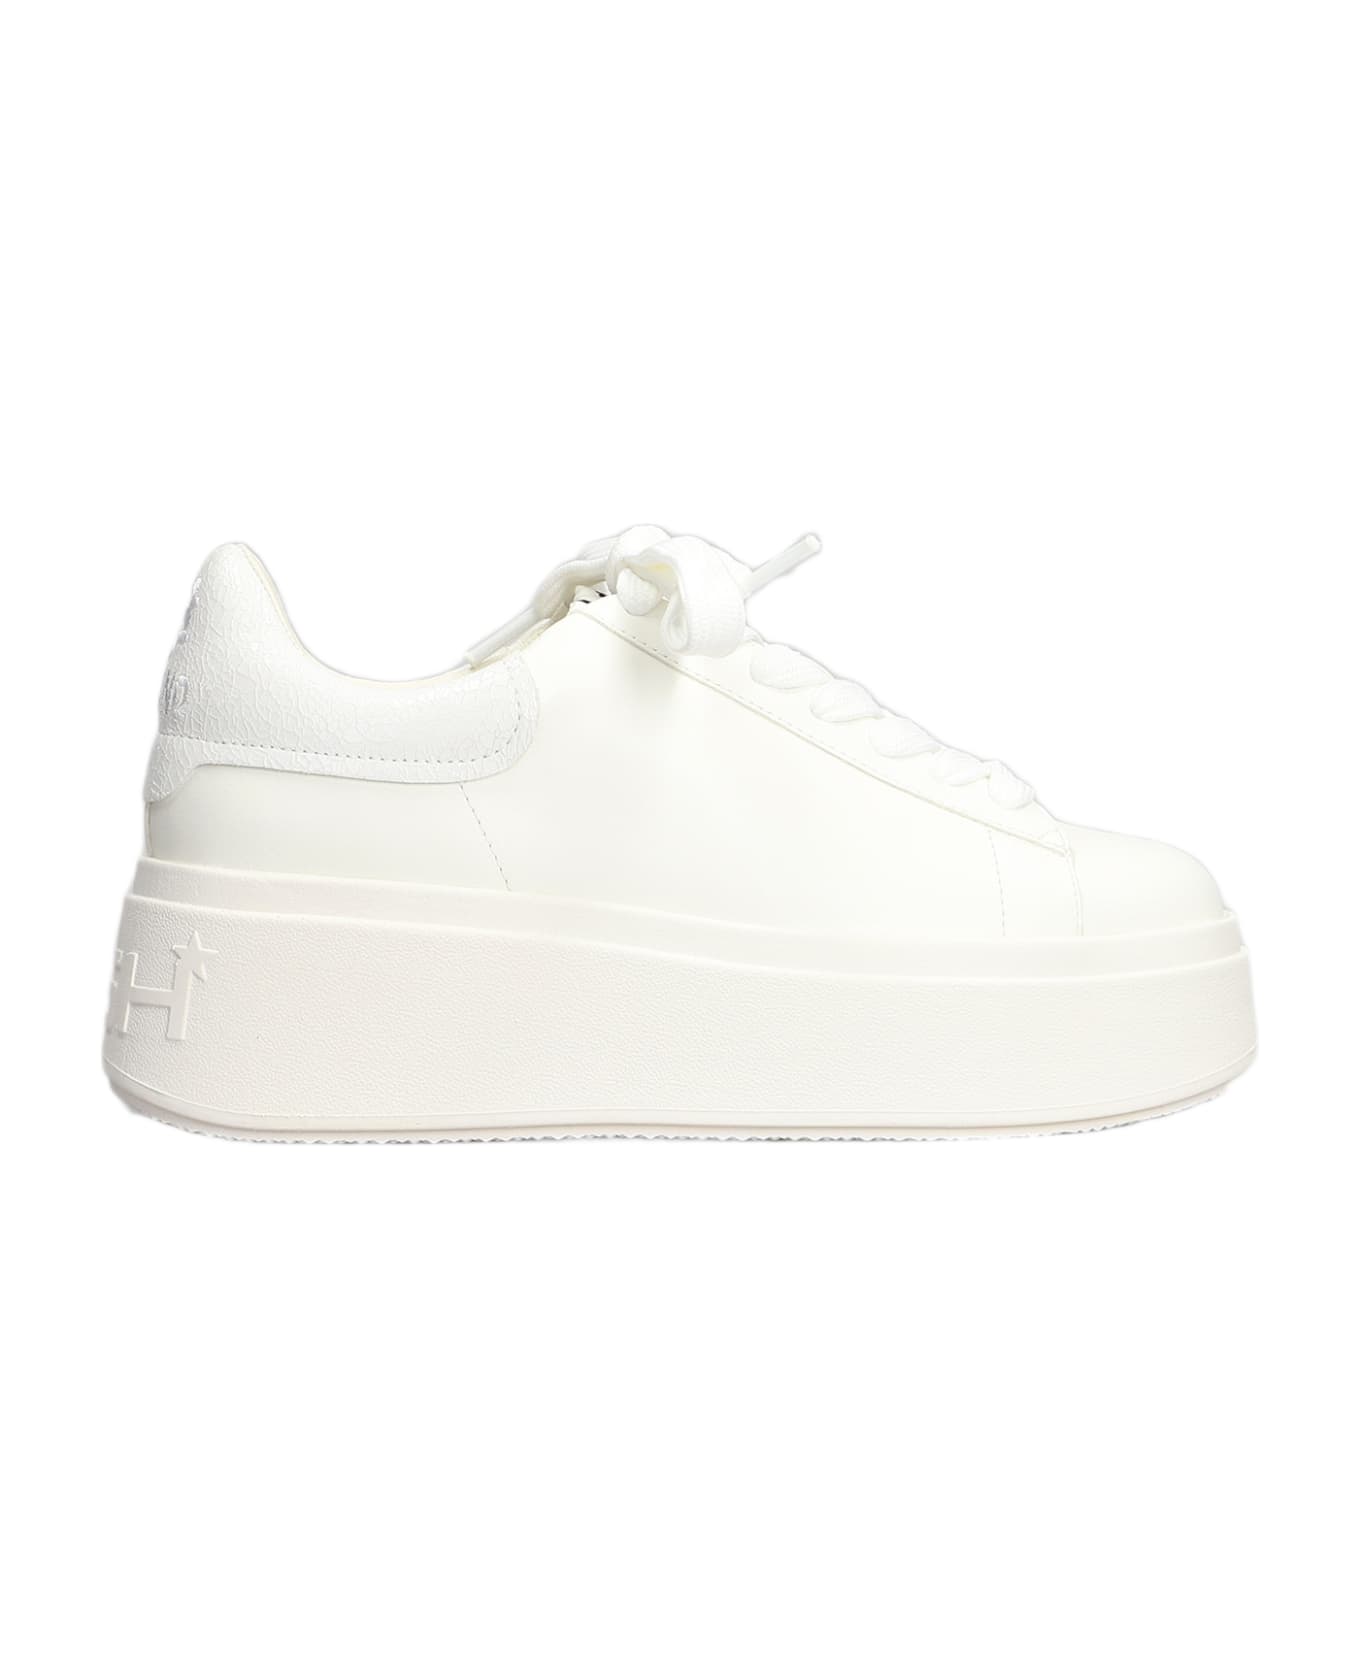 Ash Moby Bekind Sneakers In White Leather - white ウェッジシューズ